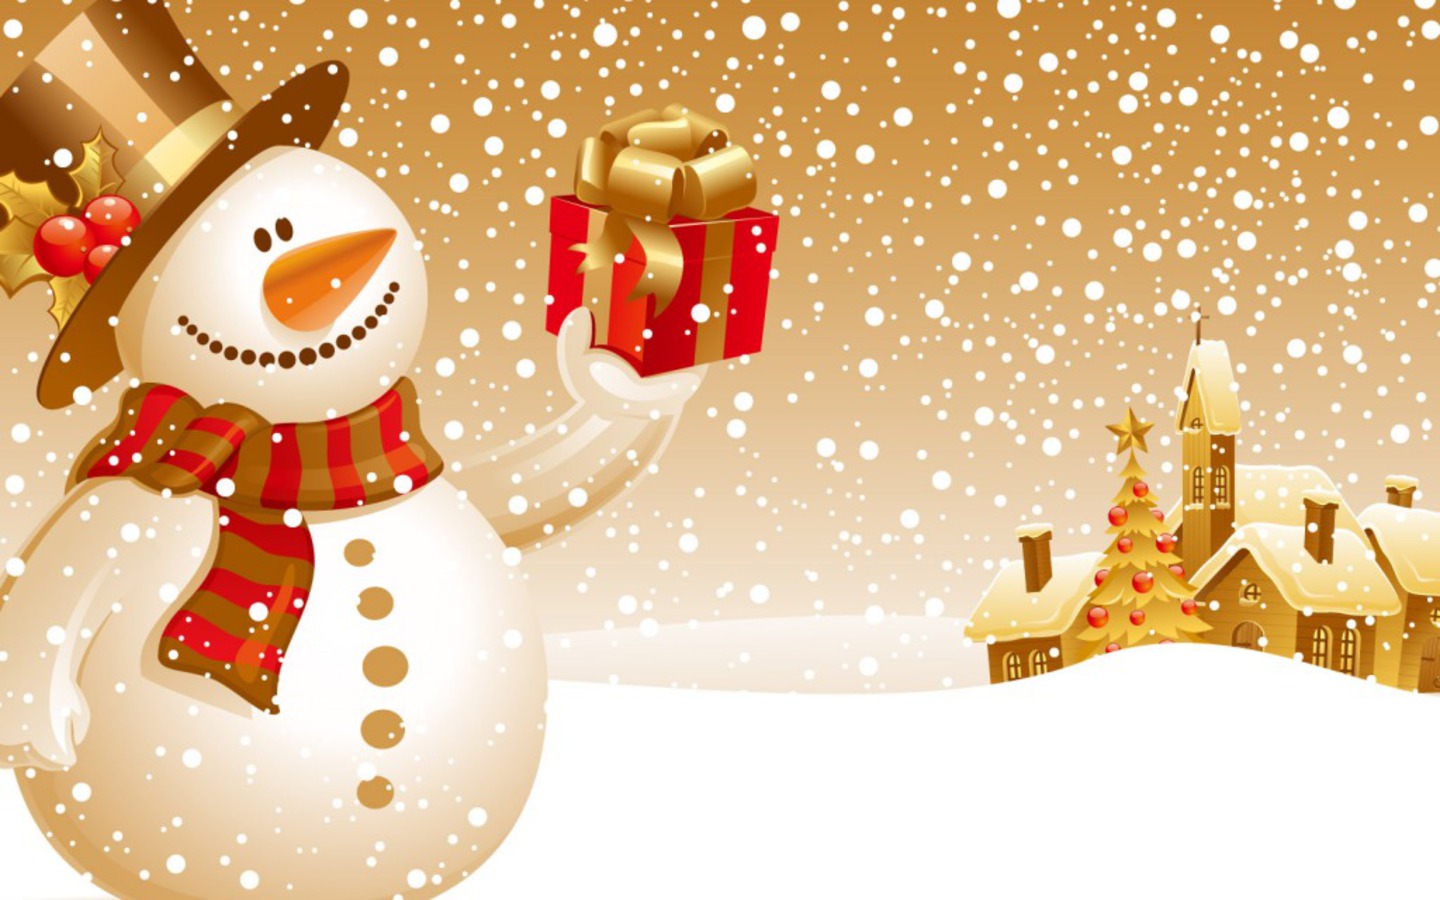 Cute Holiday Backgrounds 18365 1920x1200 px